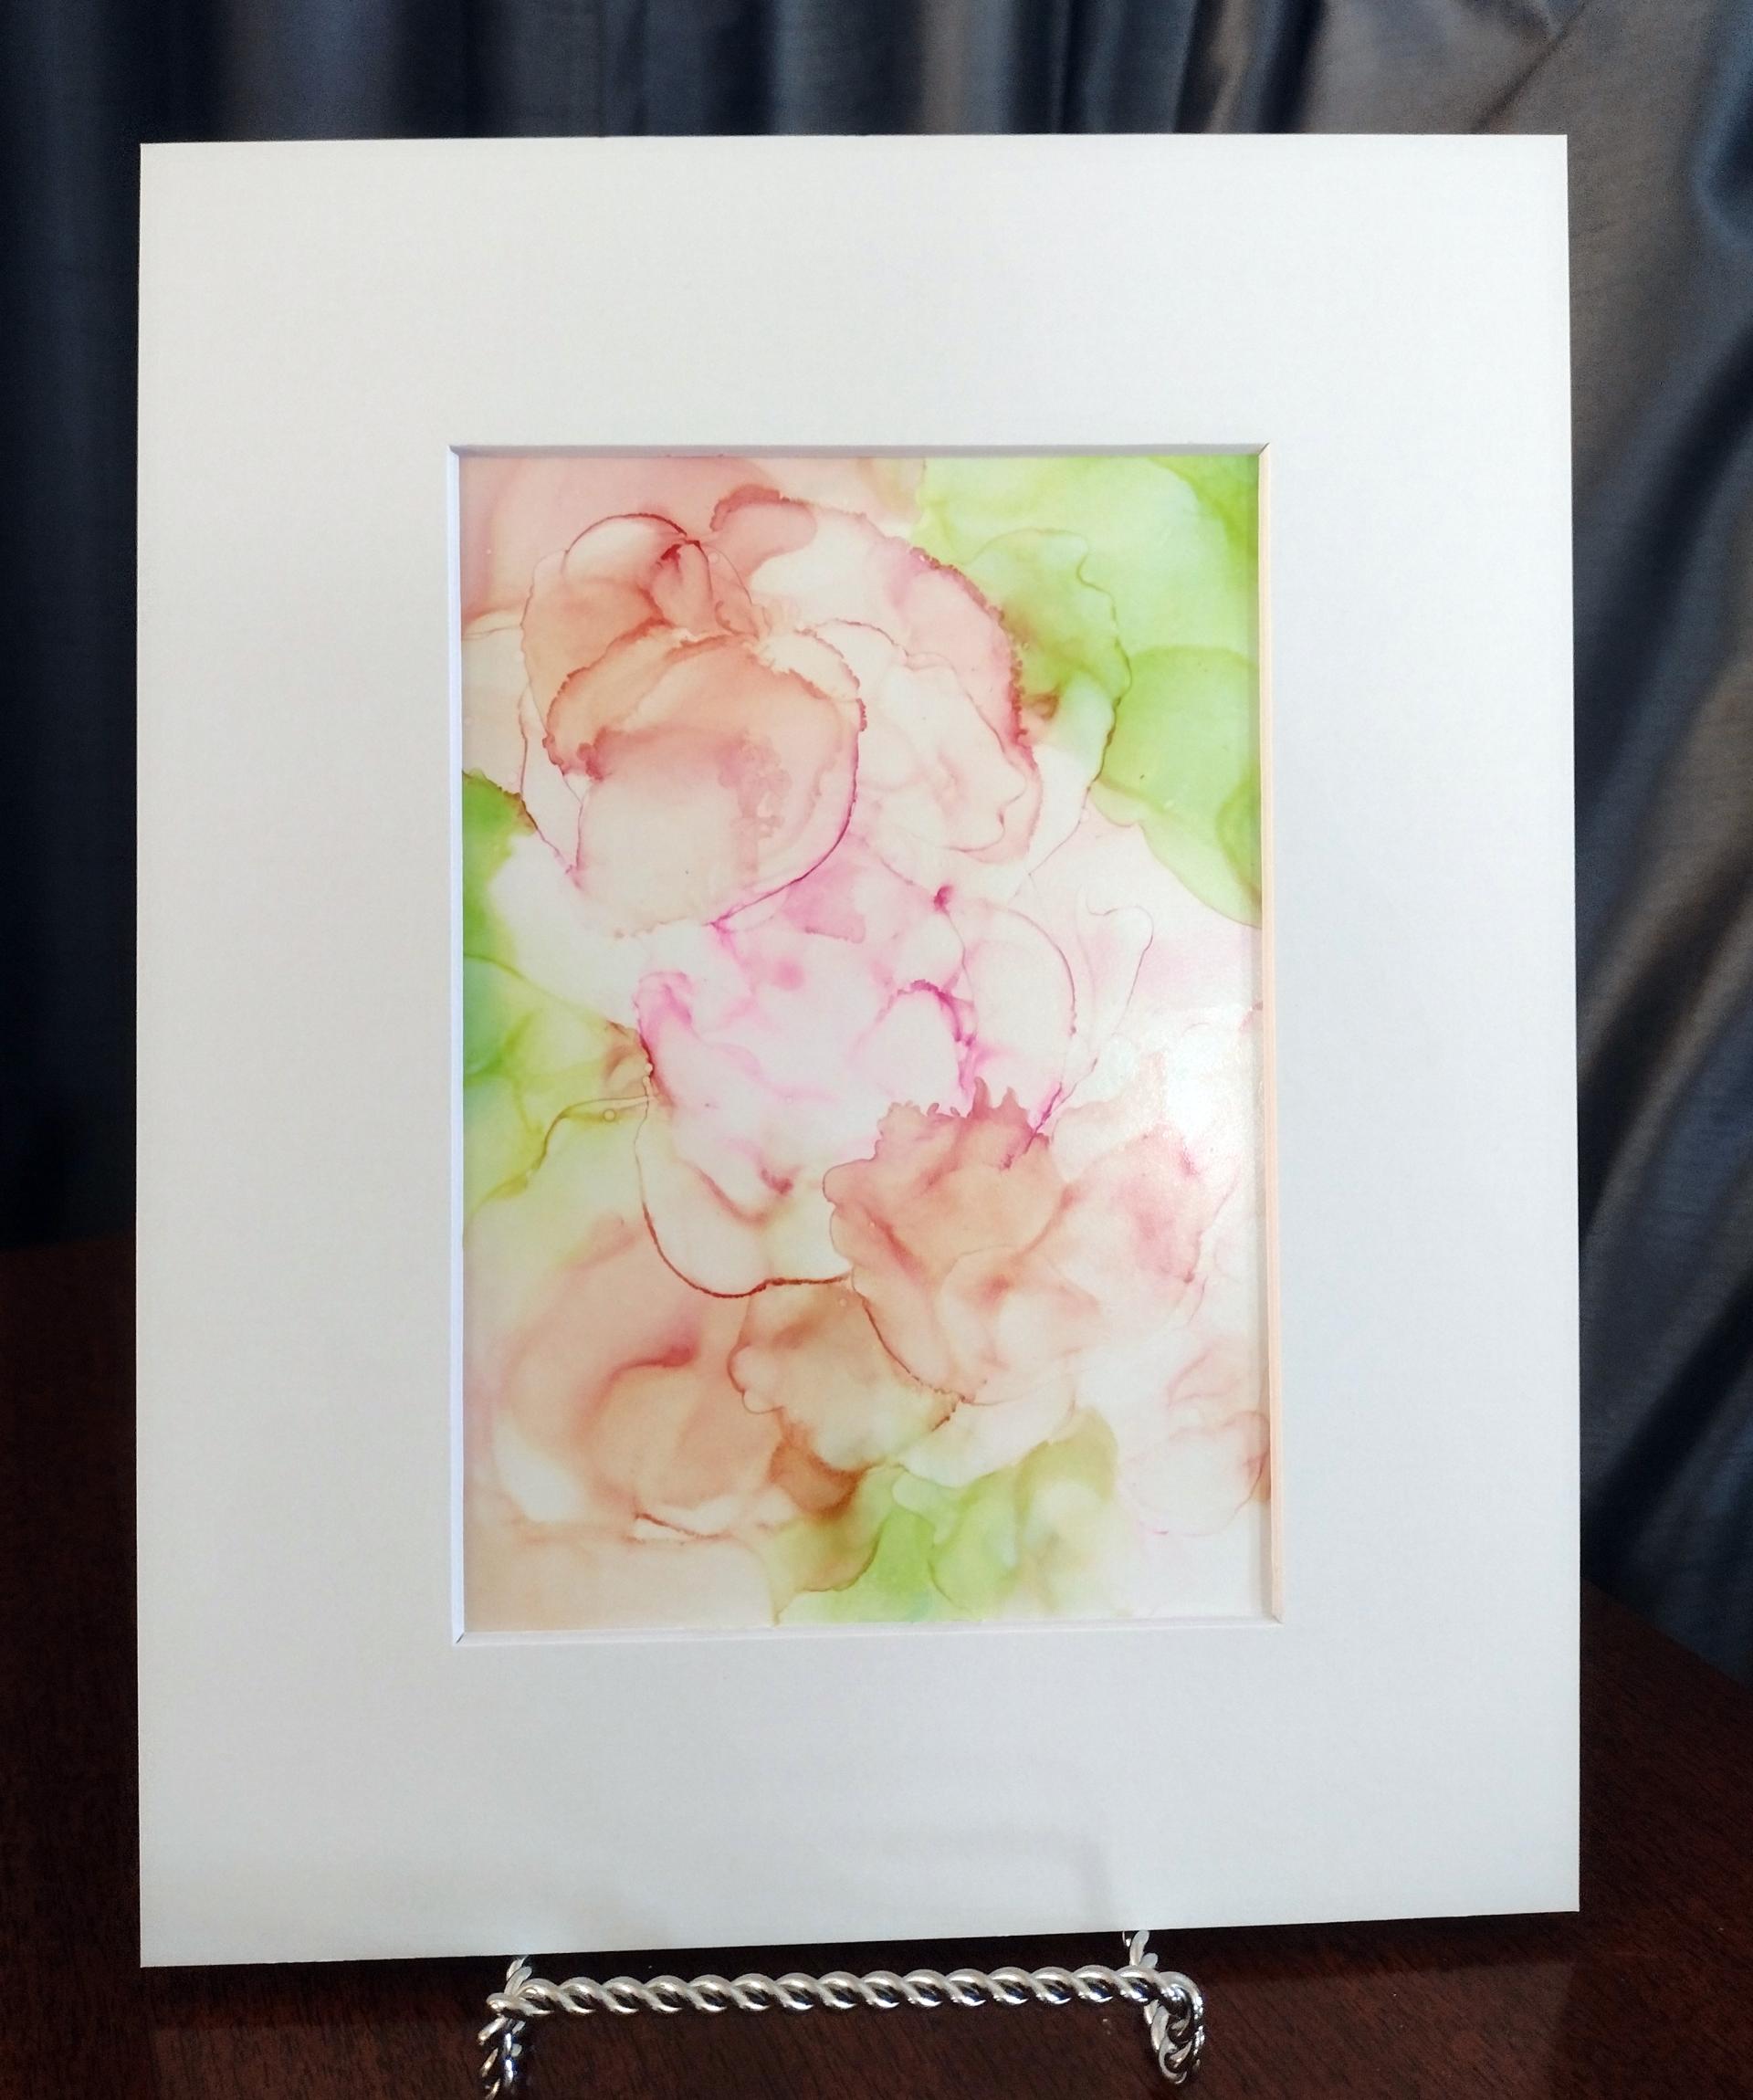 Alcohol Ink Painting, 5 x 7 Matted to 8 x 10, Pastel Floral Abstract